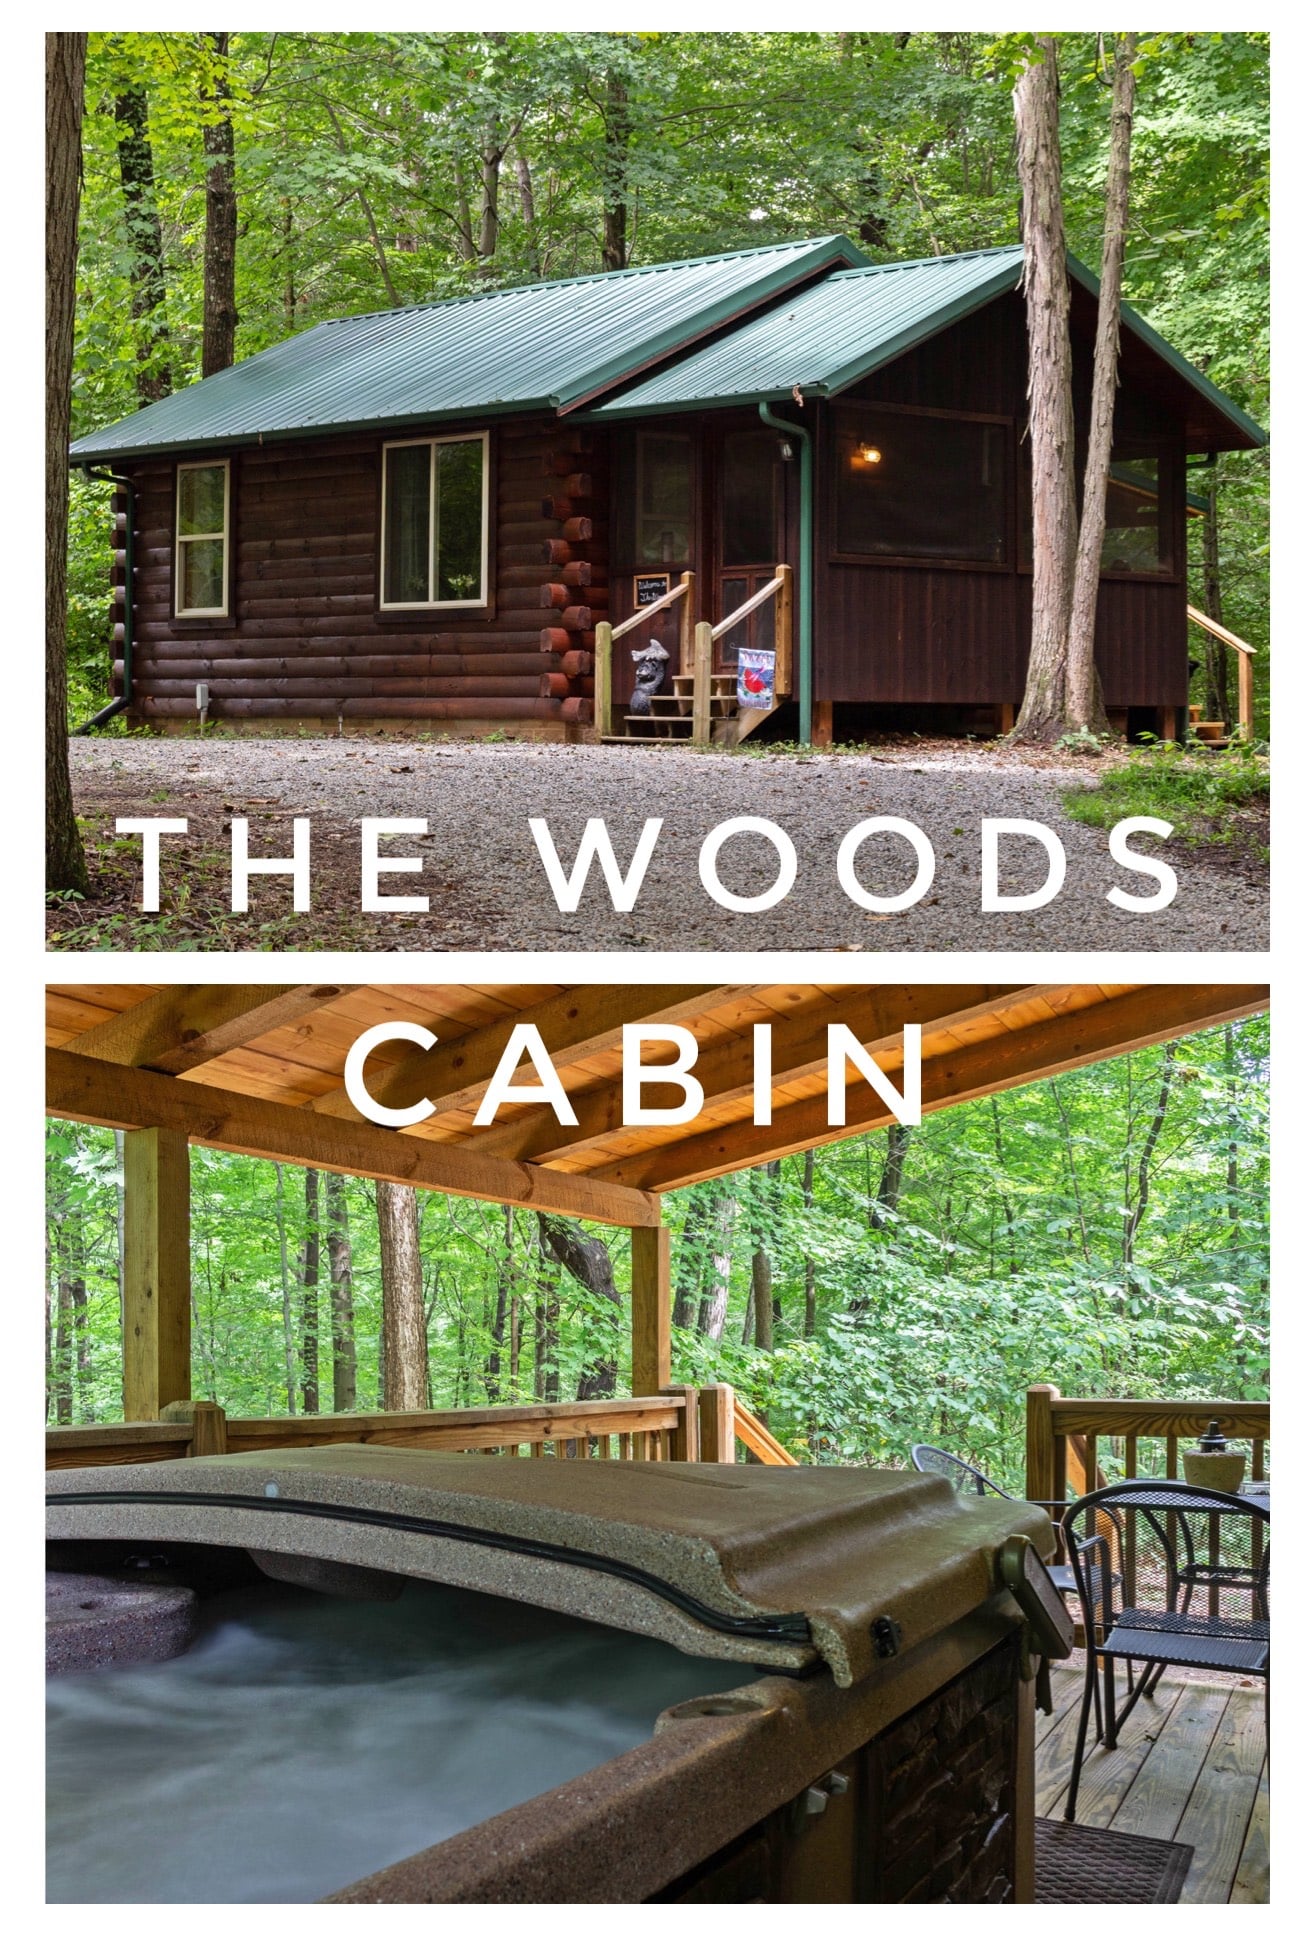 The Woods Cabin